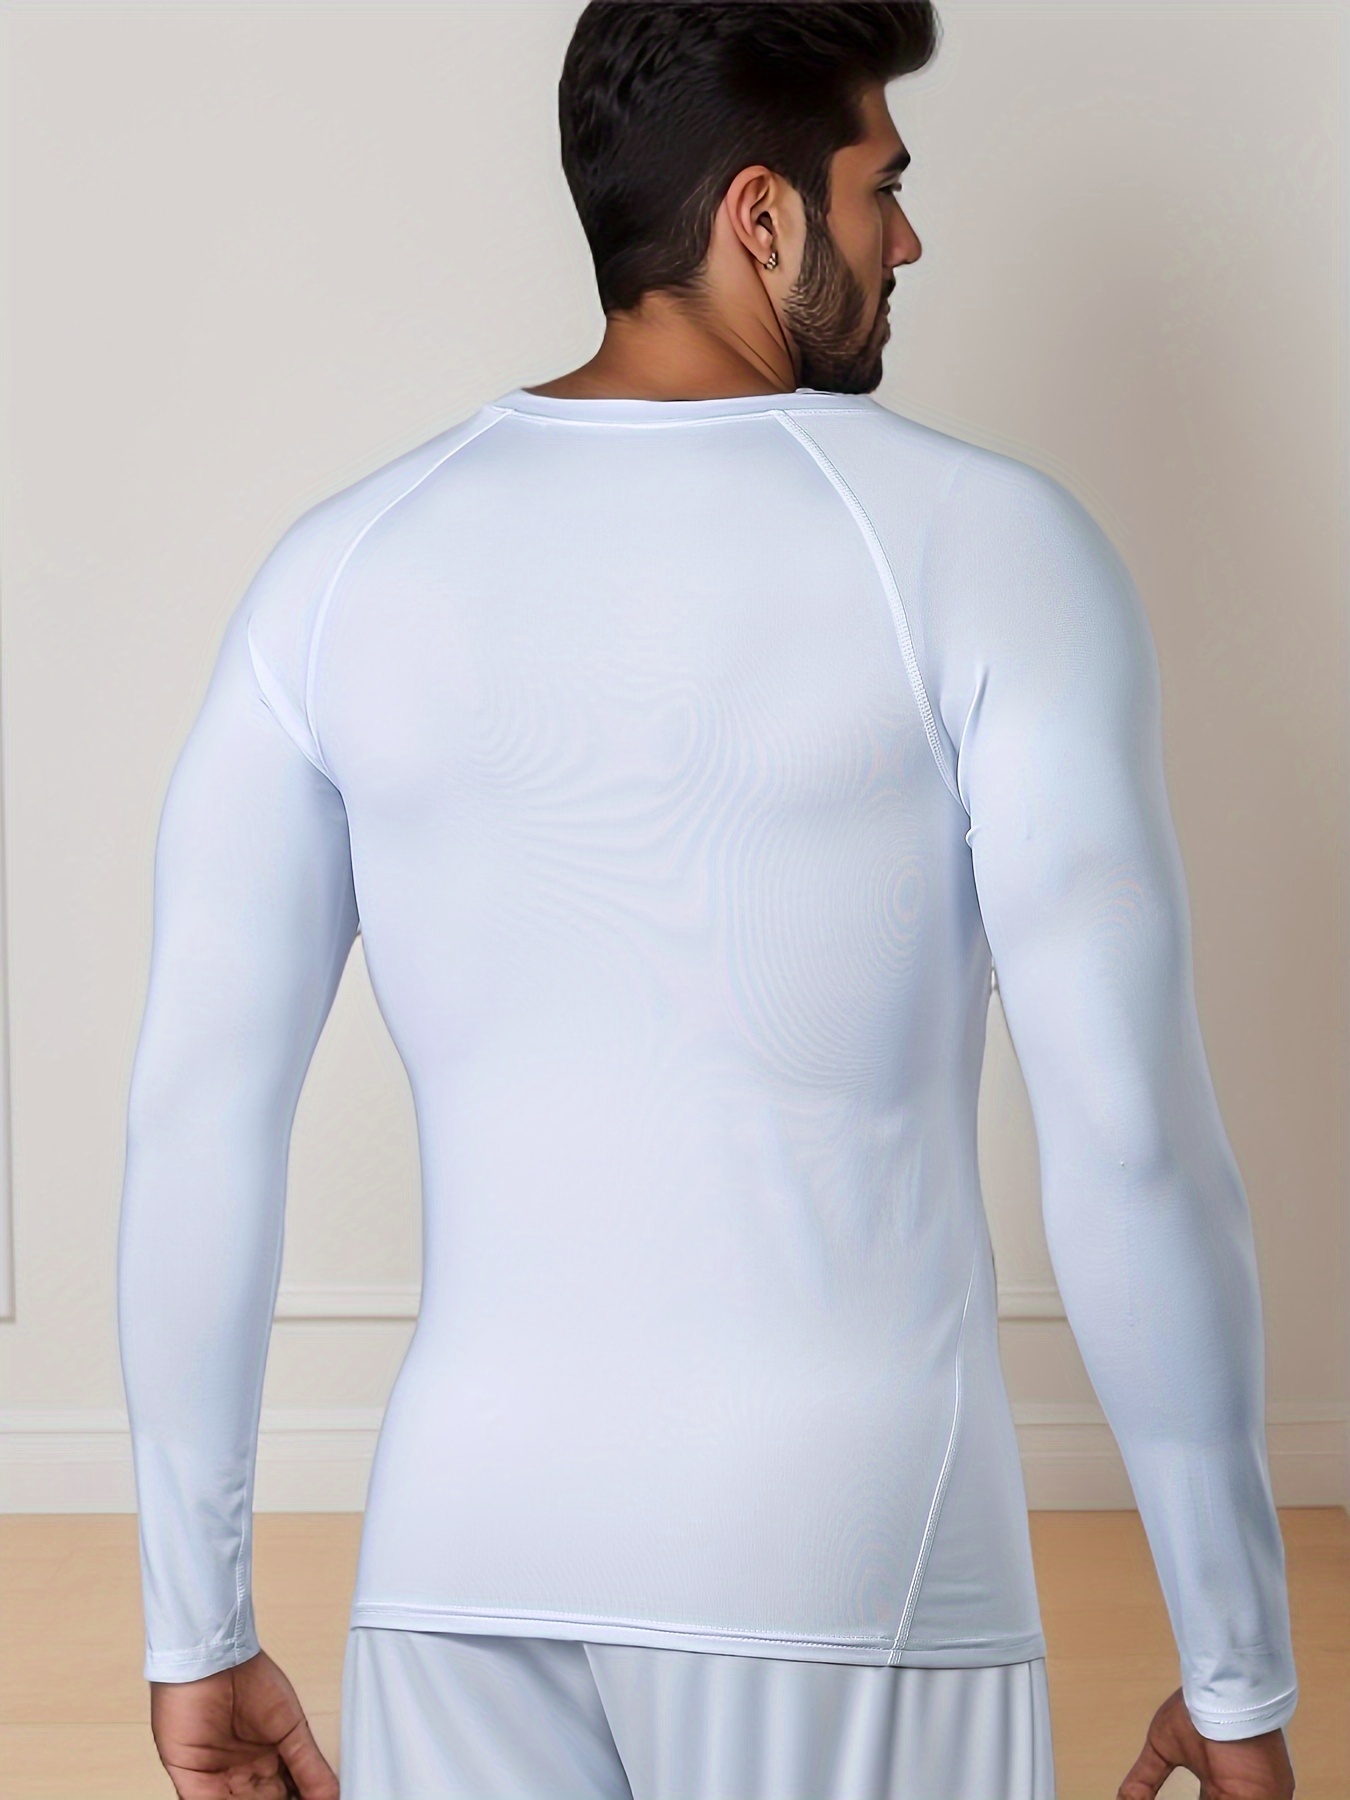 Men Women Thermal Long Sleeved Sports Top Casual Stretch Bottoming Shirt  T-shirt